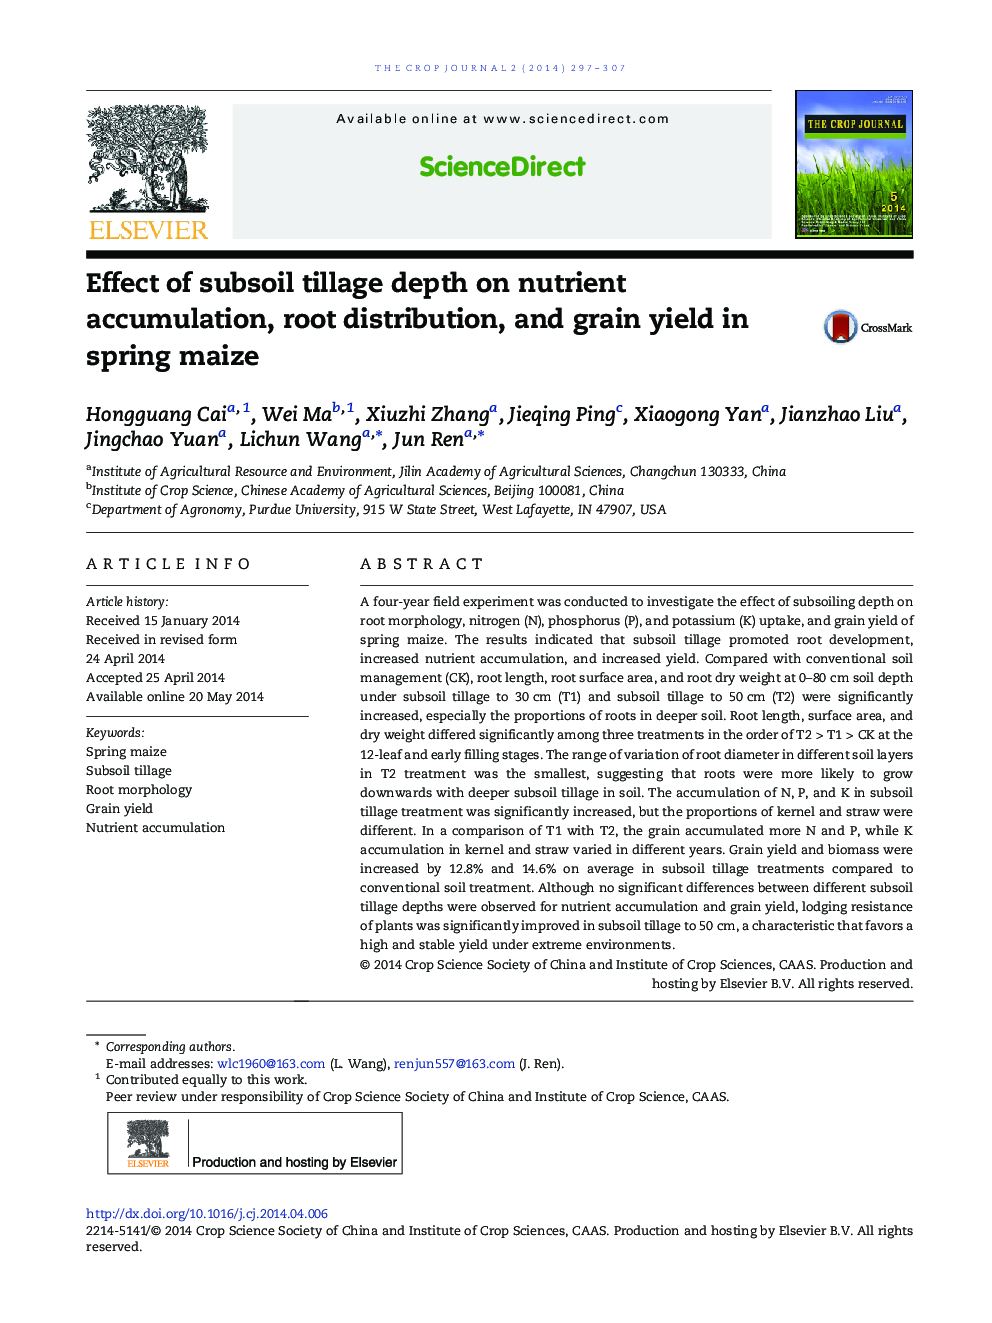 Effect of subsoil tillage depth on nutrient accumulation, root distribution, and grain yield in spring maize 